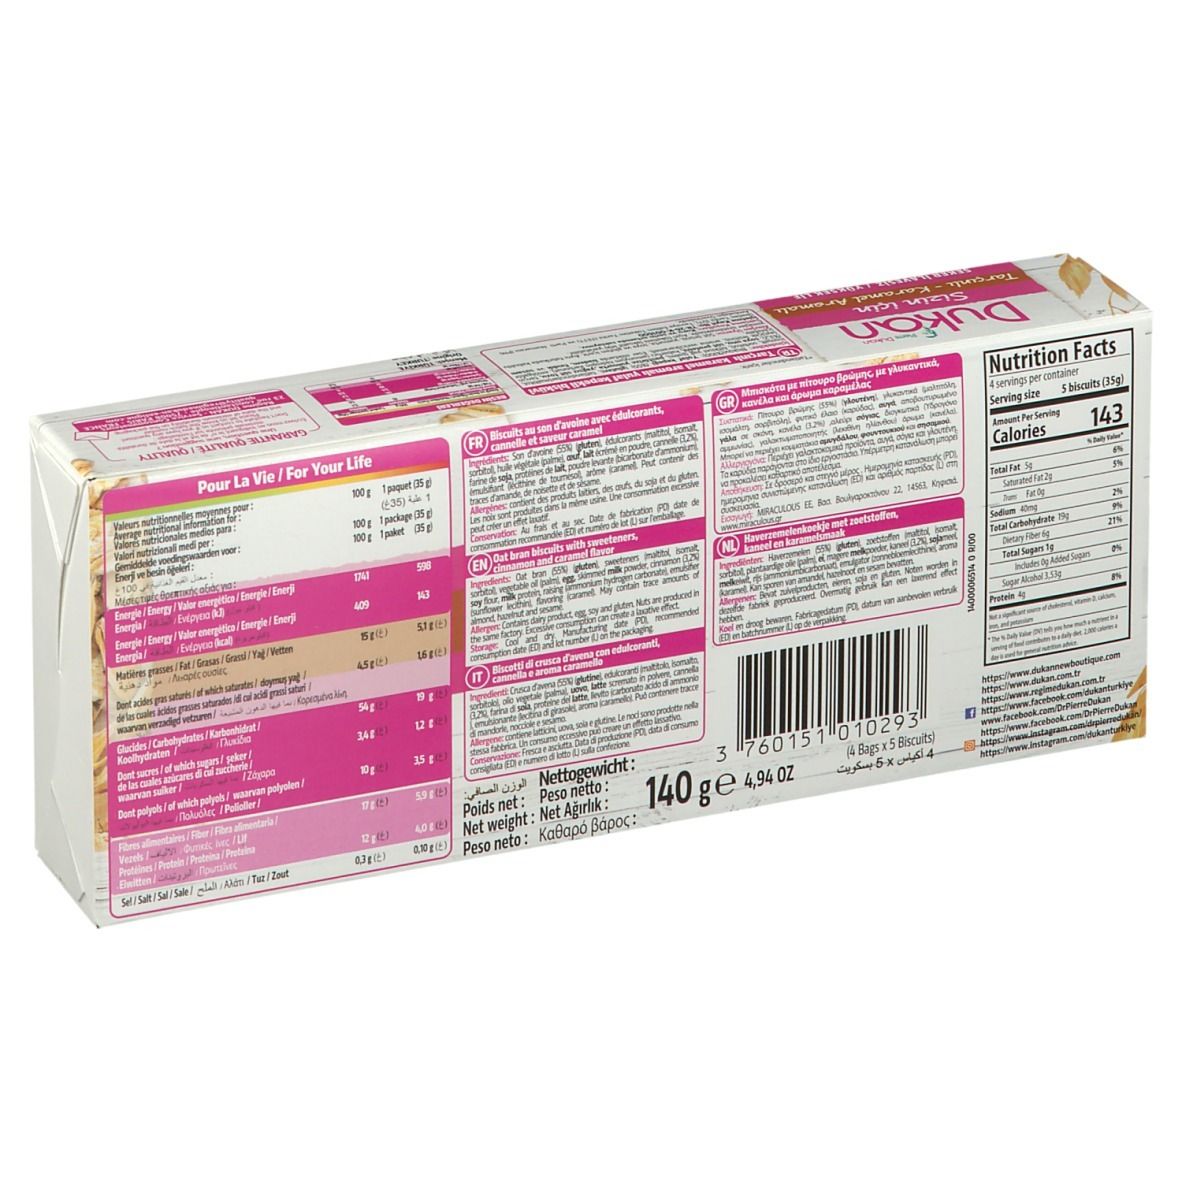 Dukan Biscuits Aromatisés Caramel Cannelle 140g